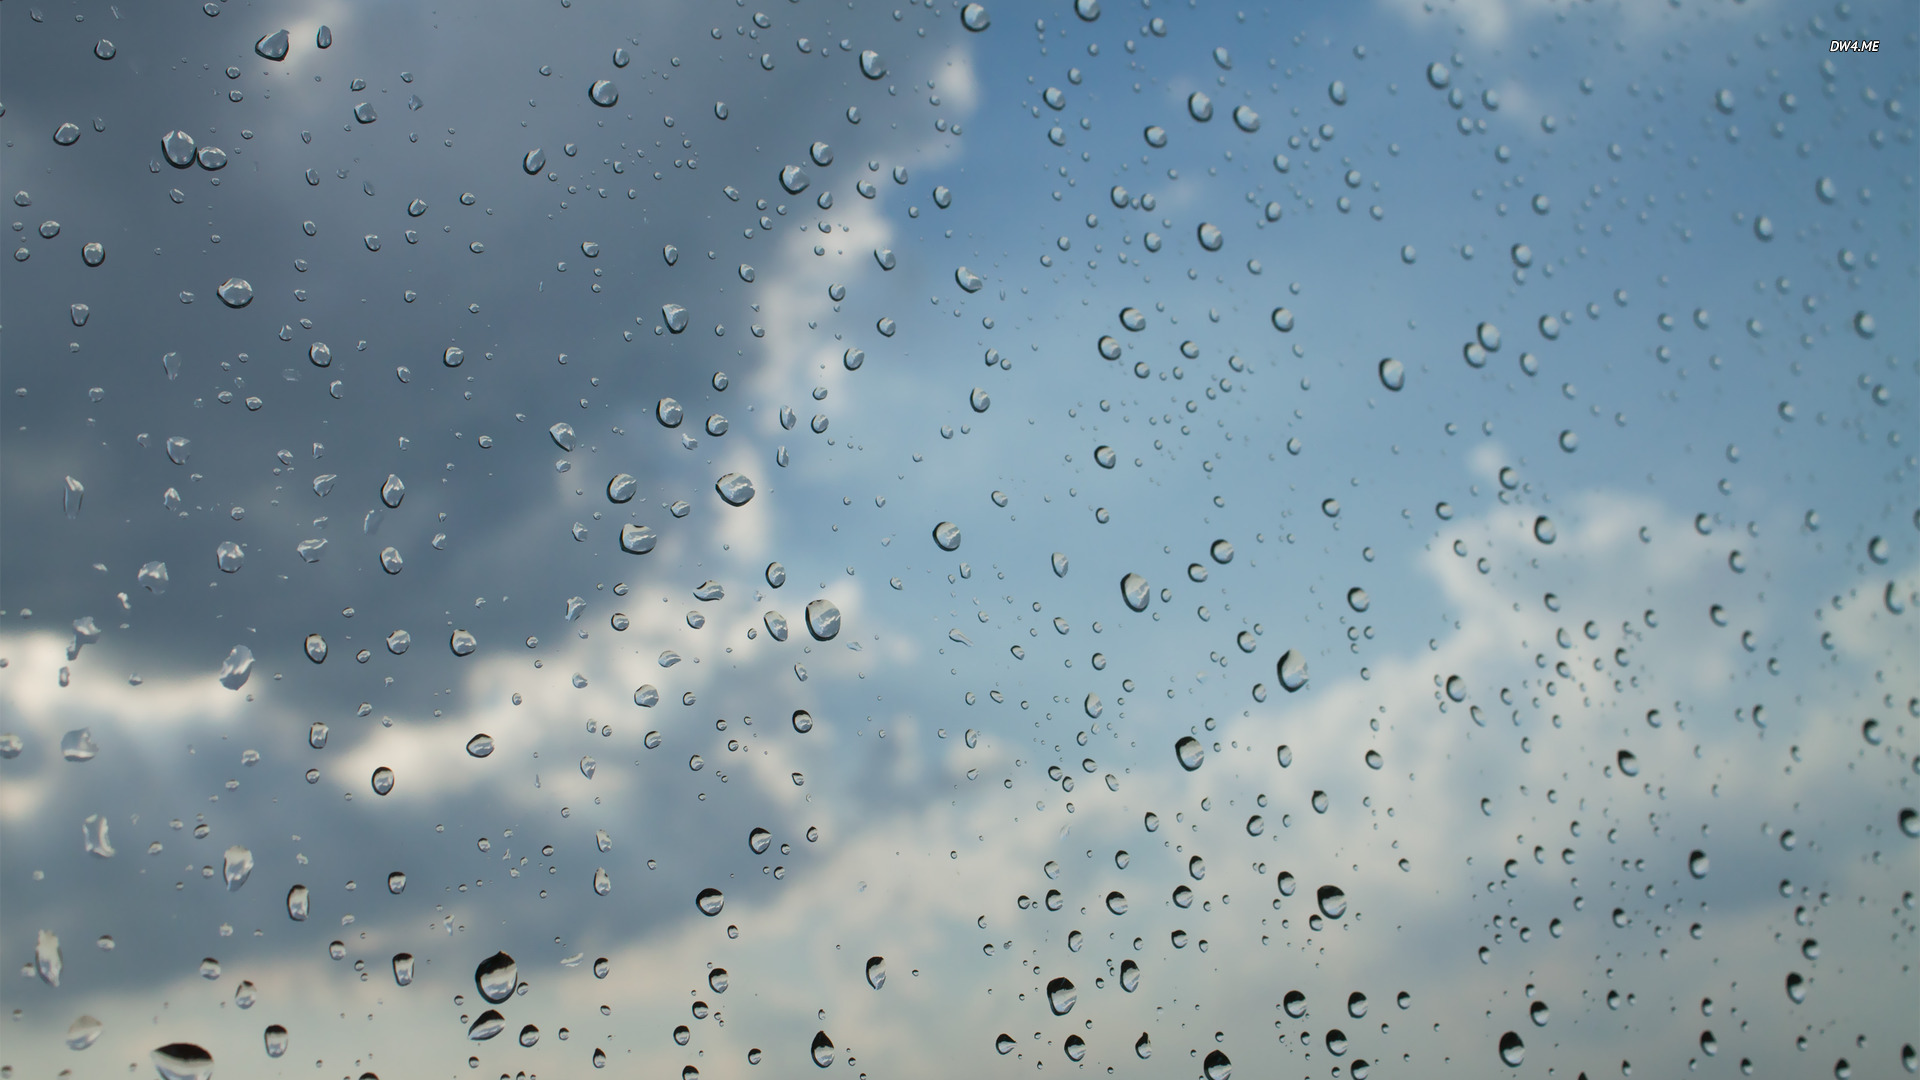 Raindrops Backgrounds Raindrops and clouds wallpaper